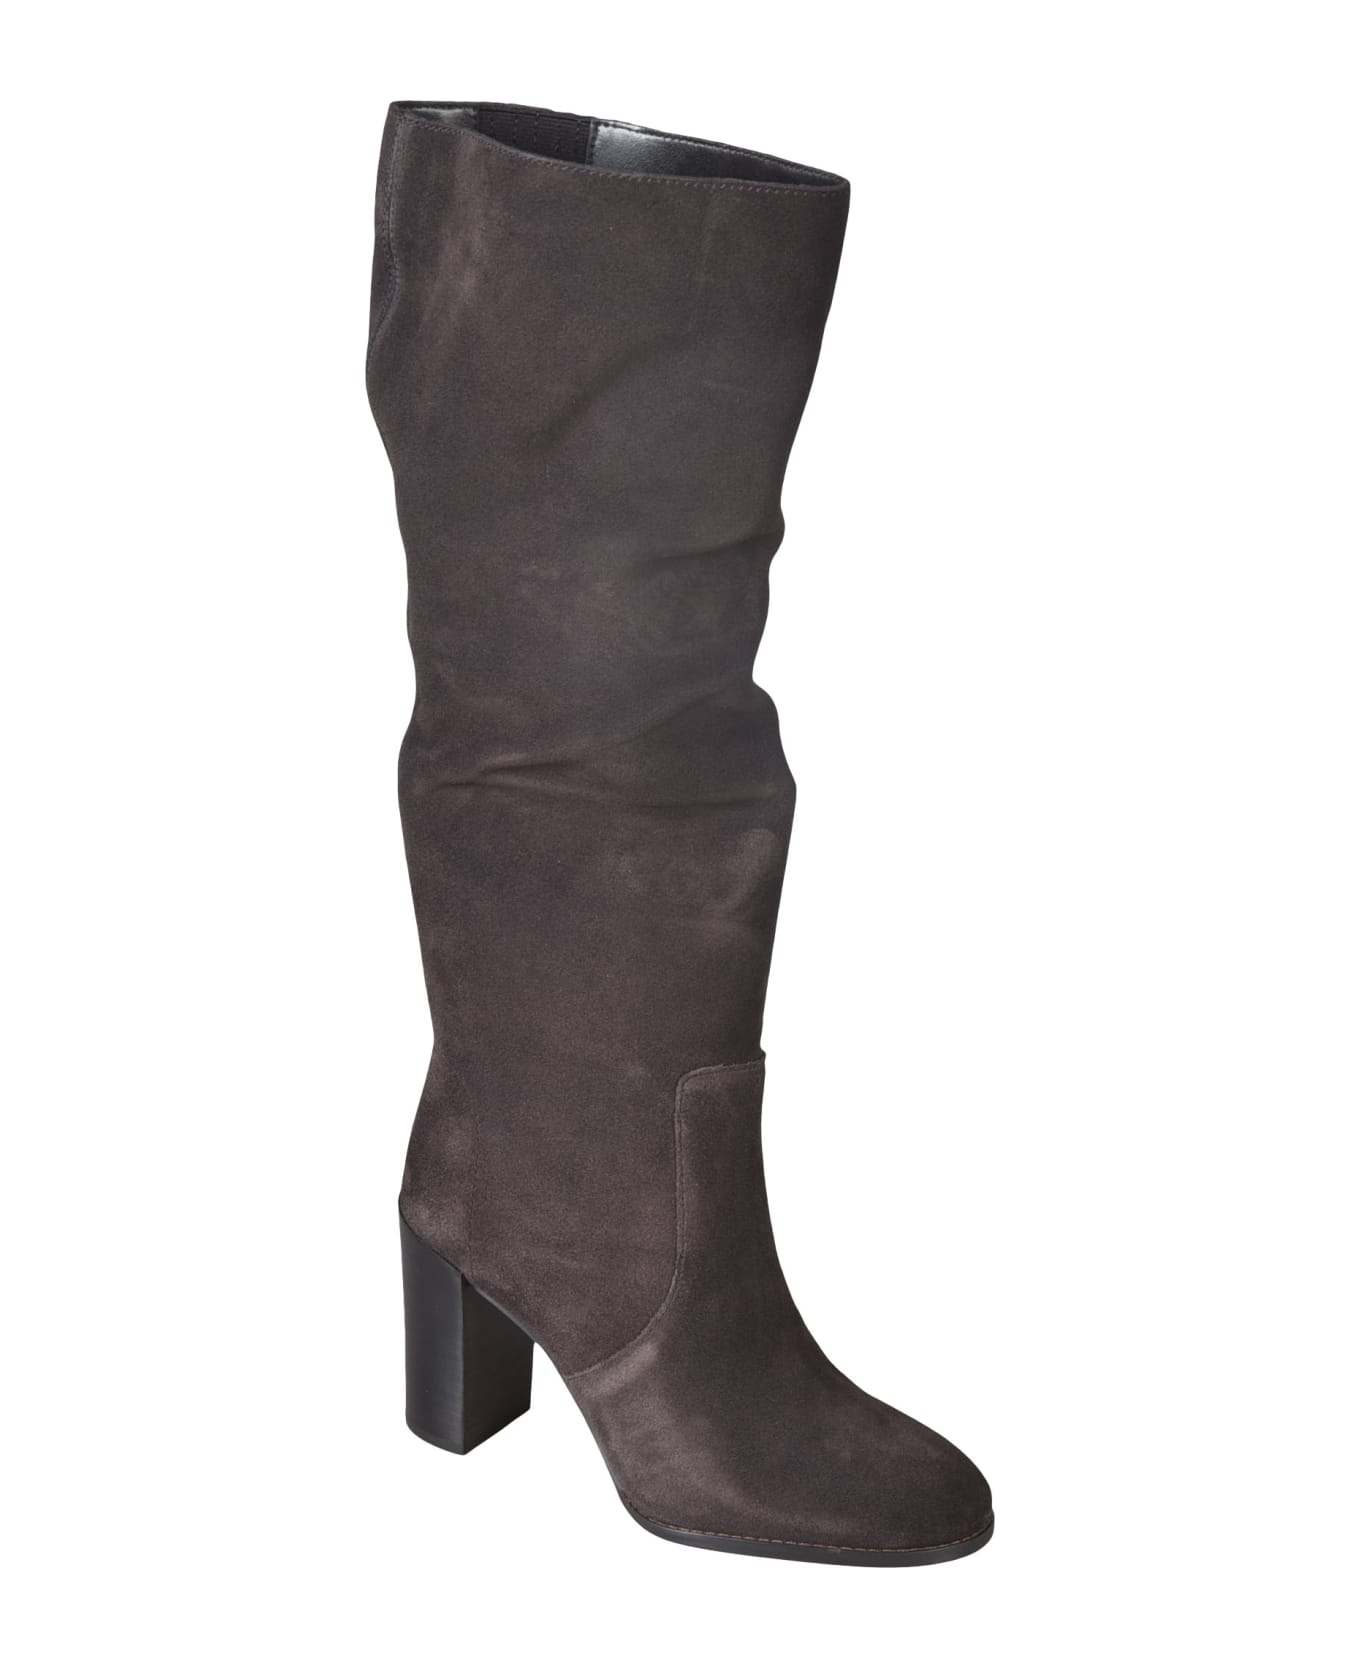 Michael Kors Luella Suede Knee High Boots - Chocolate